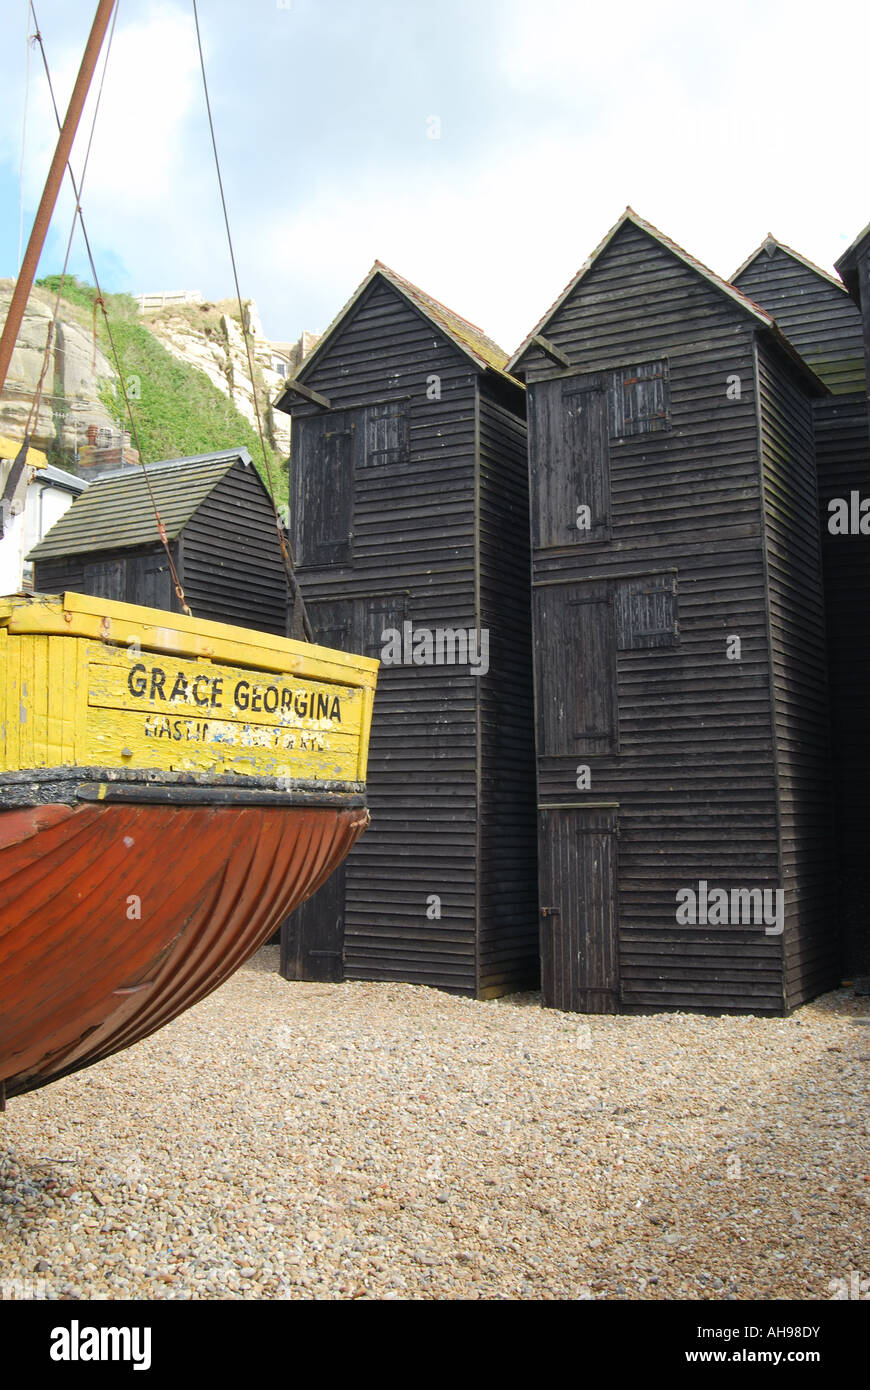 Fishing boats and net drying sheds, The Stade, Hastings Old Town, Hastings, East Sussex, England, United Kingdom Stock Photo